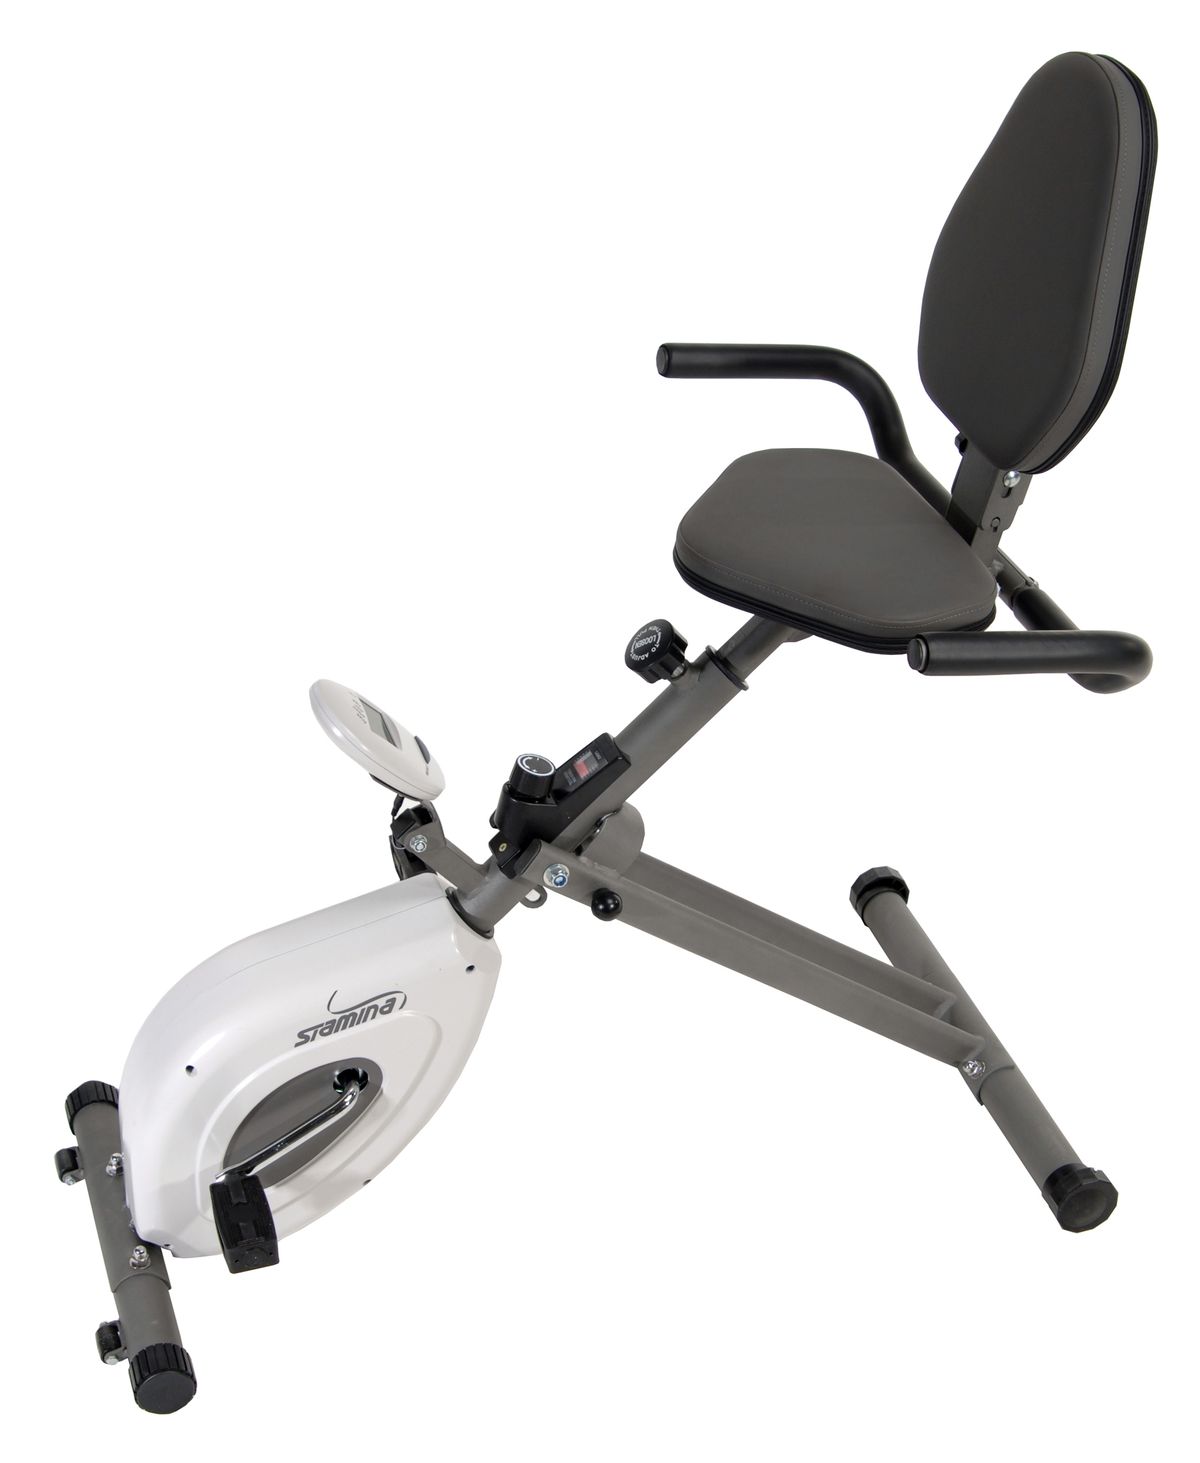 This product image released by Stamina shows the Folding Exercise Bike, which has adjustable resistance and seat and LCD tracking monitor.